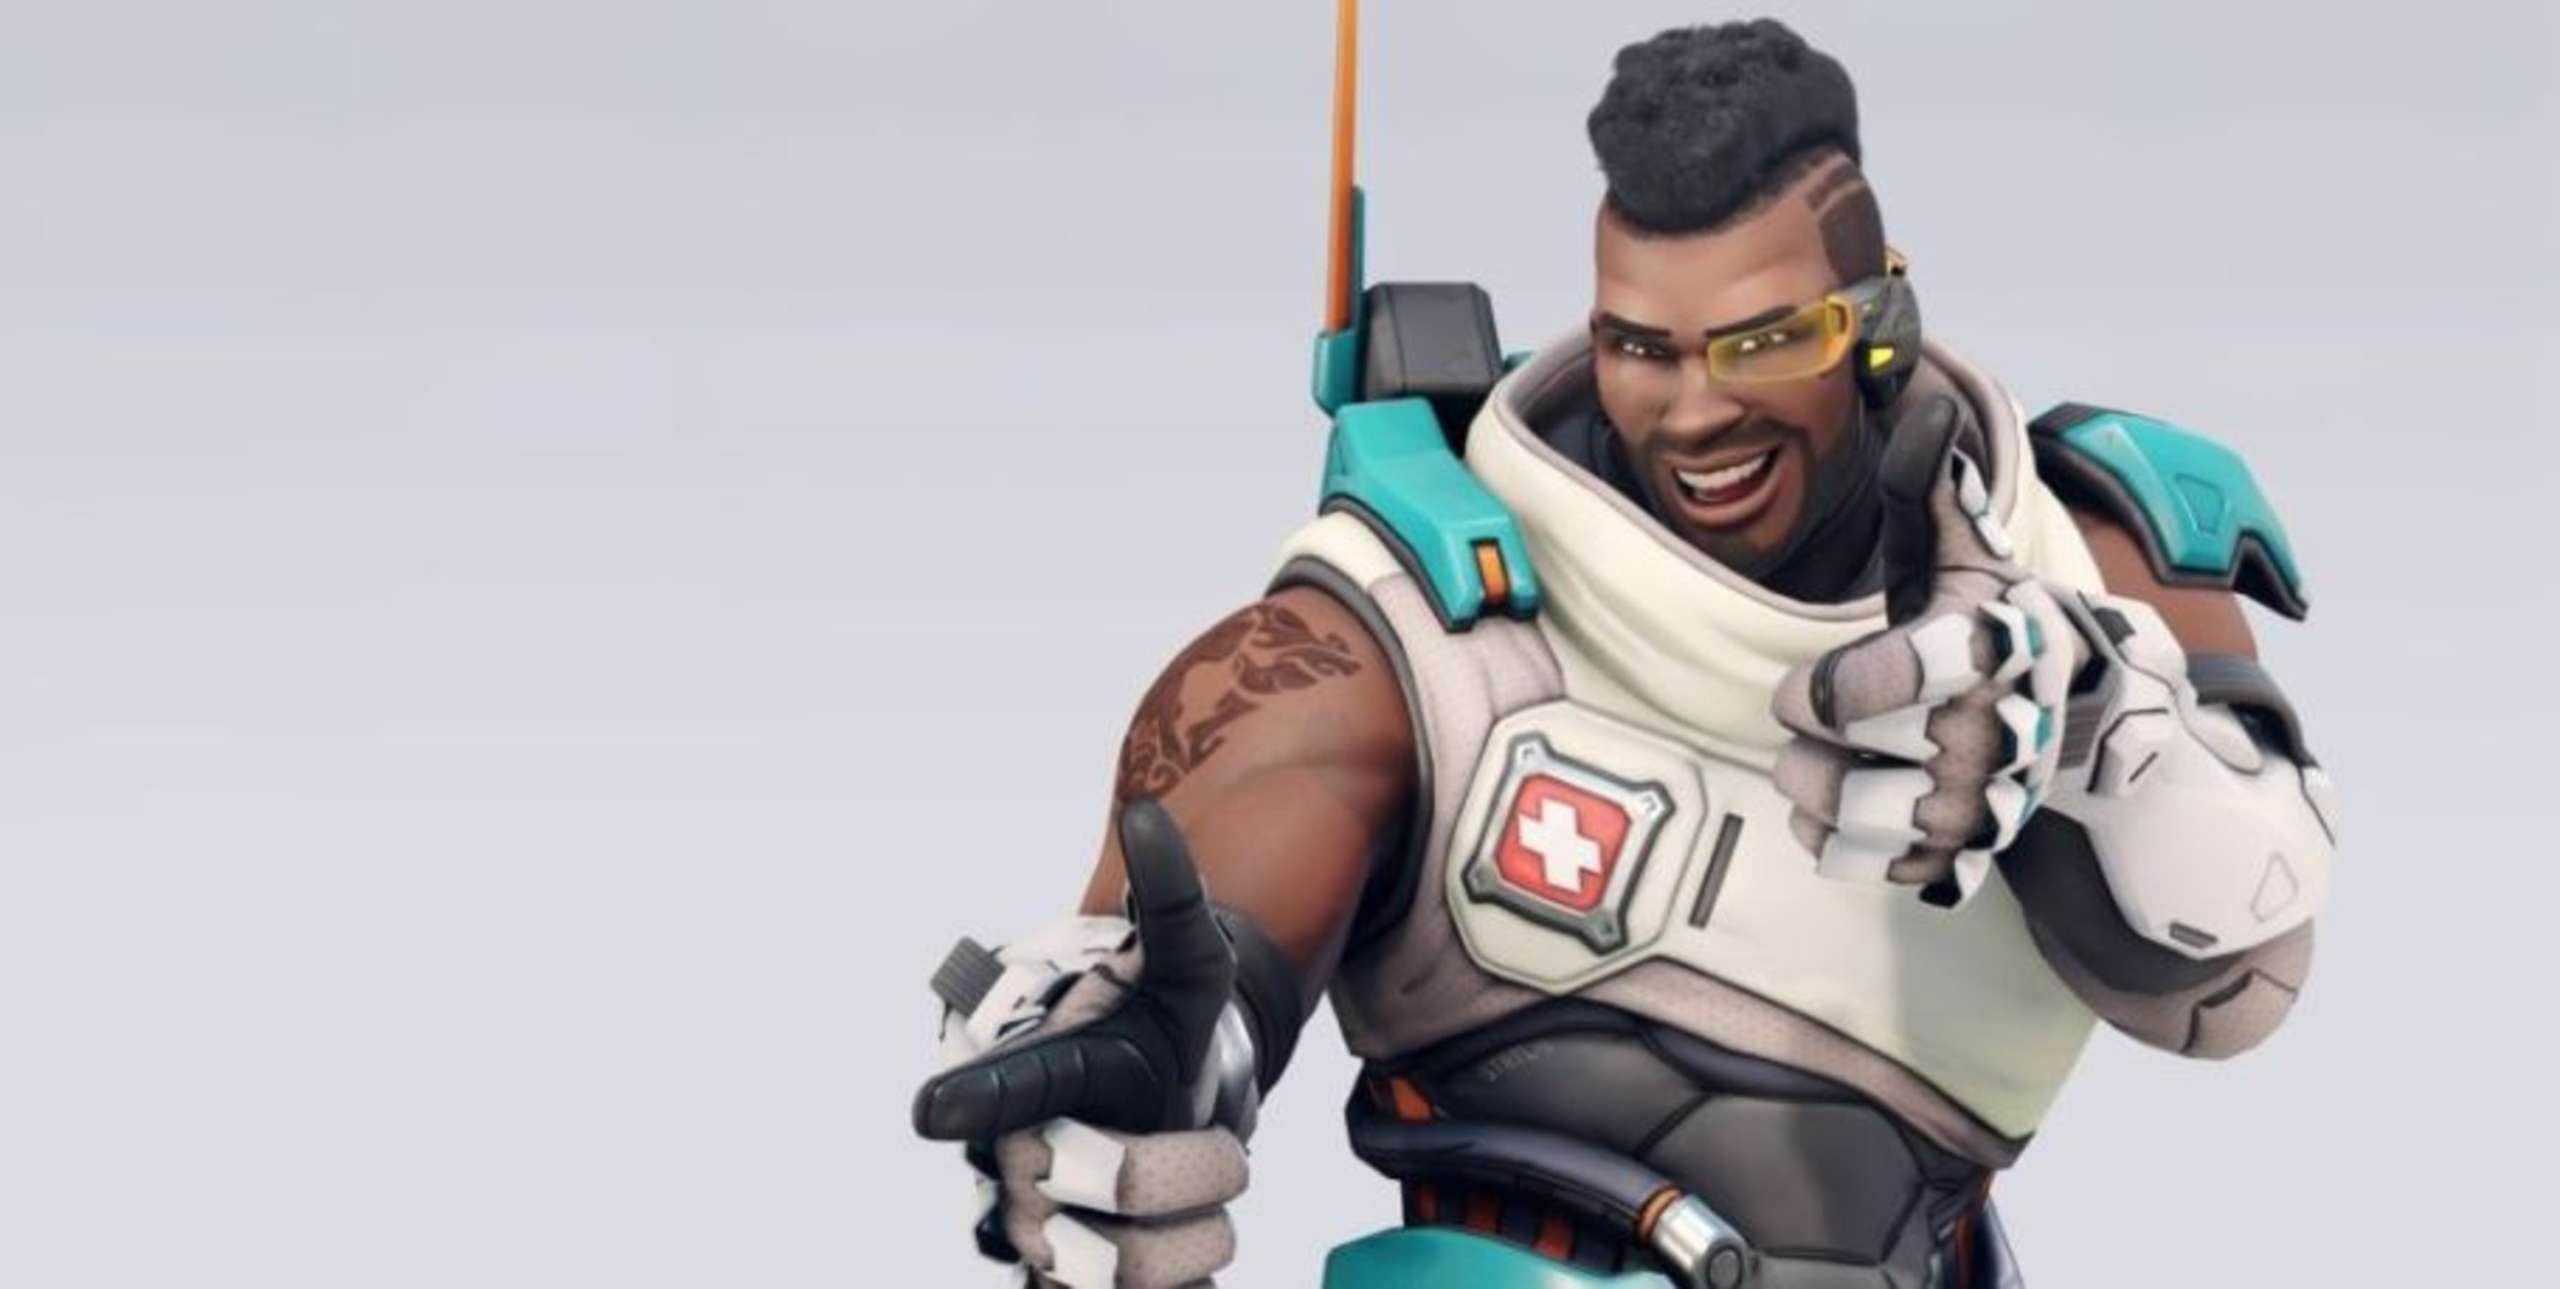 During Mei’s Blizzard, A Baptiste Player On Overwatch 2 Demonstrates The Optimal Defensive Ultimate For Healing His Team’s Ana In A Pinch